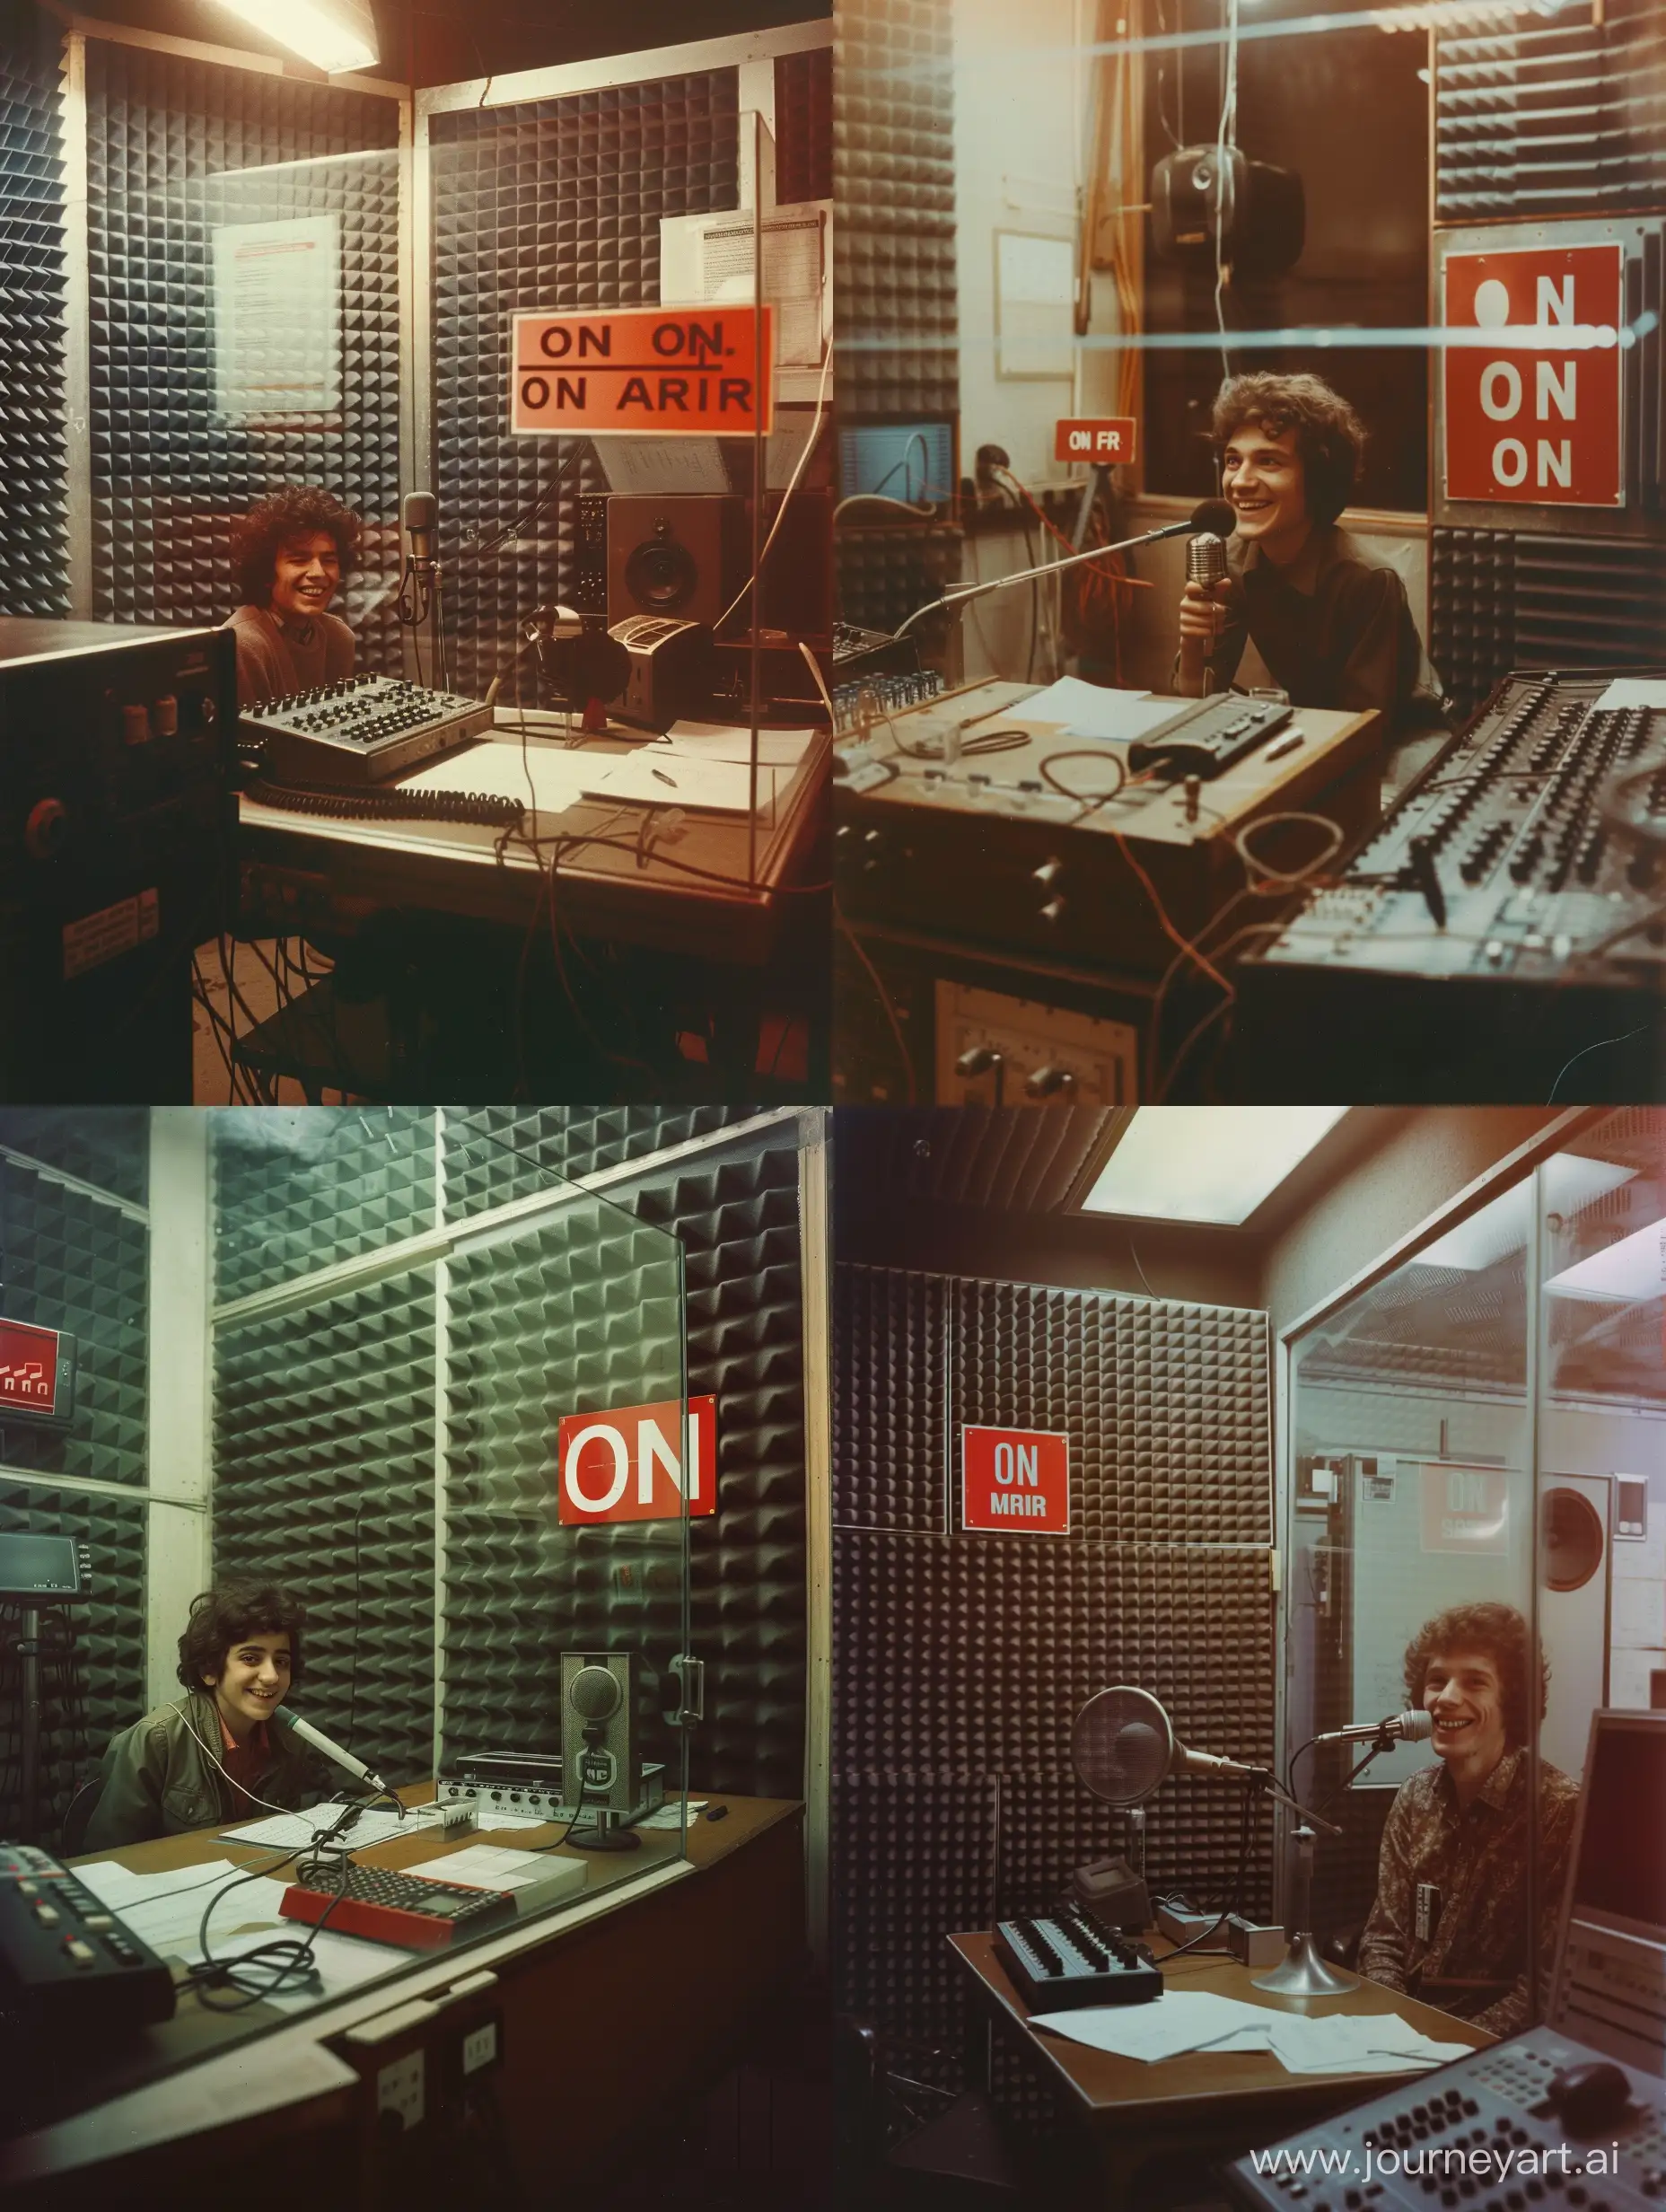 Smiling-Young-Radio-Host-in-1980s-Italian-Station-Recording-Room